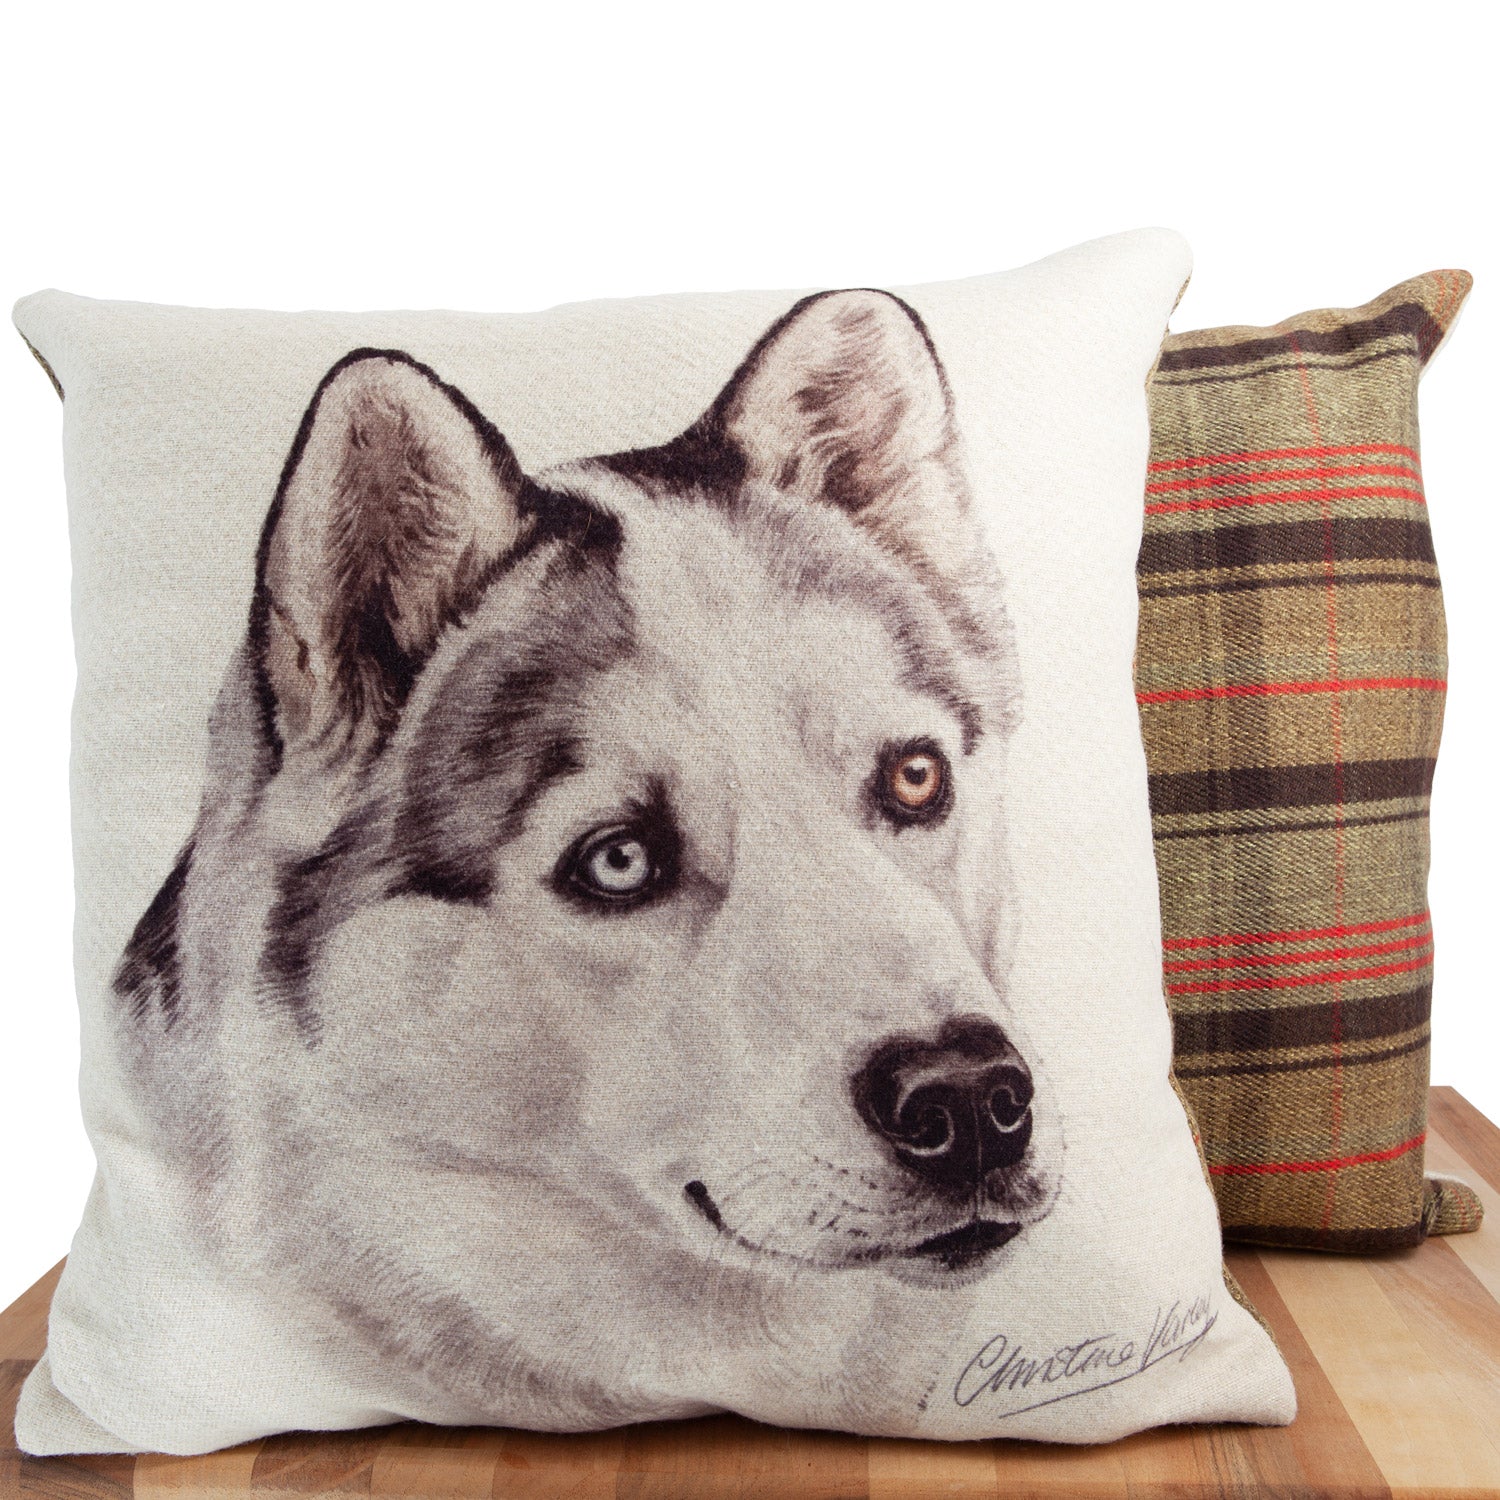 Dog Lover Gifts available at Dog Krazy Gifts. Husky Cushion, part of our Christine Varley collection – available at www.dogkrazygifts.co.uk